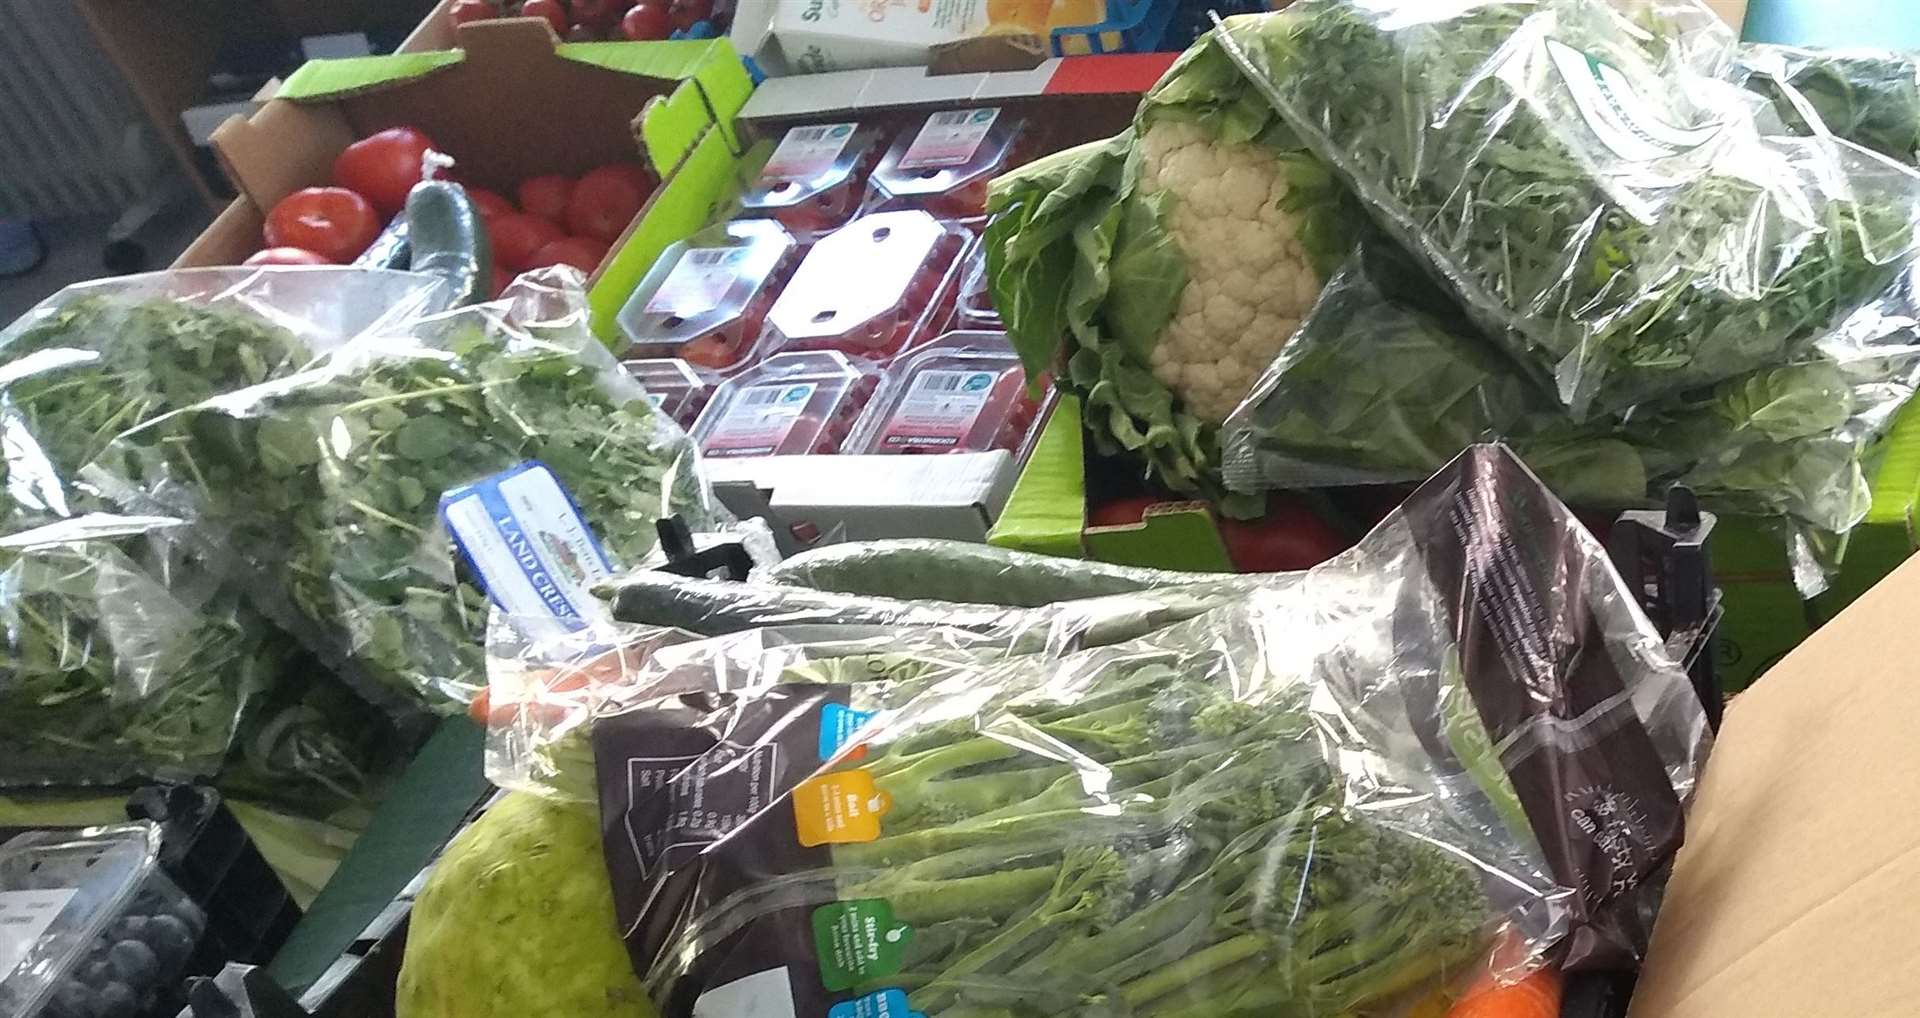 Free boxes of groceries will be delivered to people most in need of help